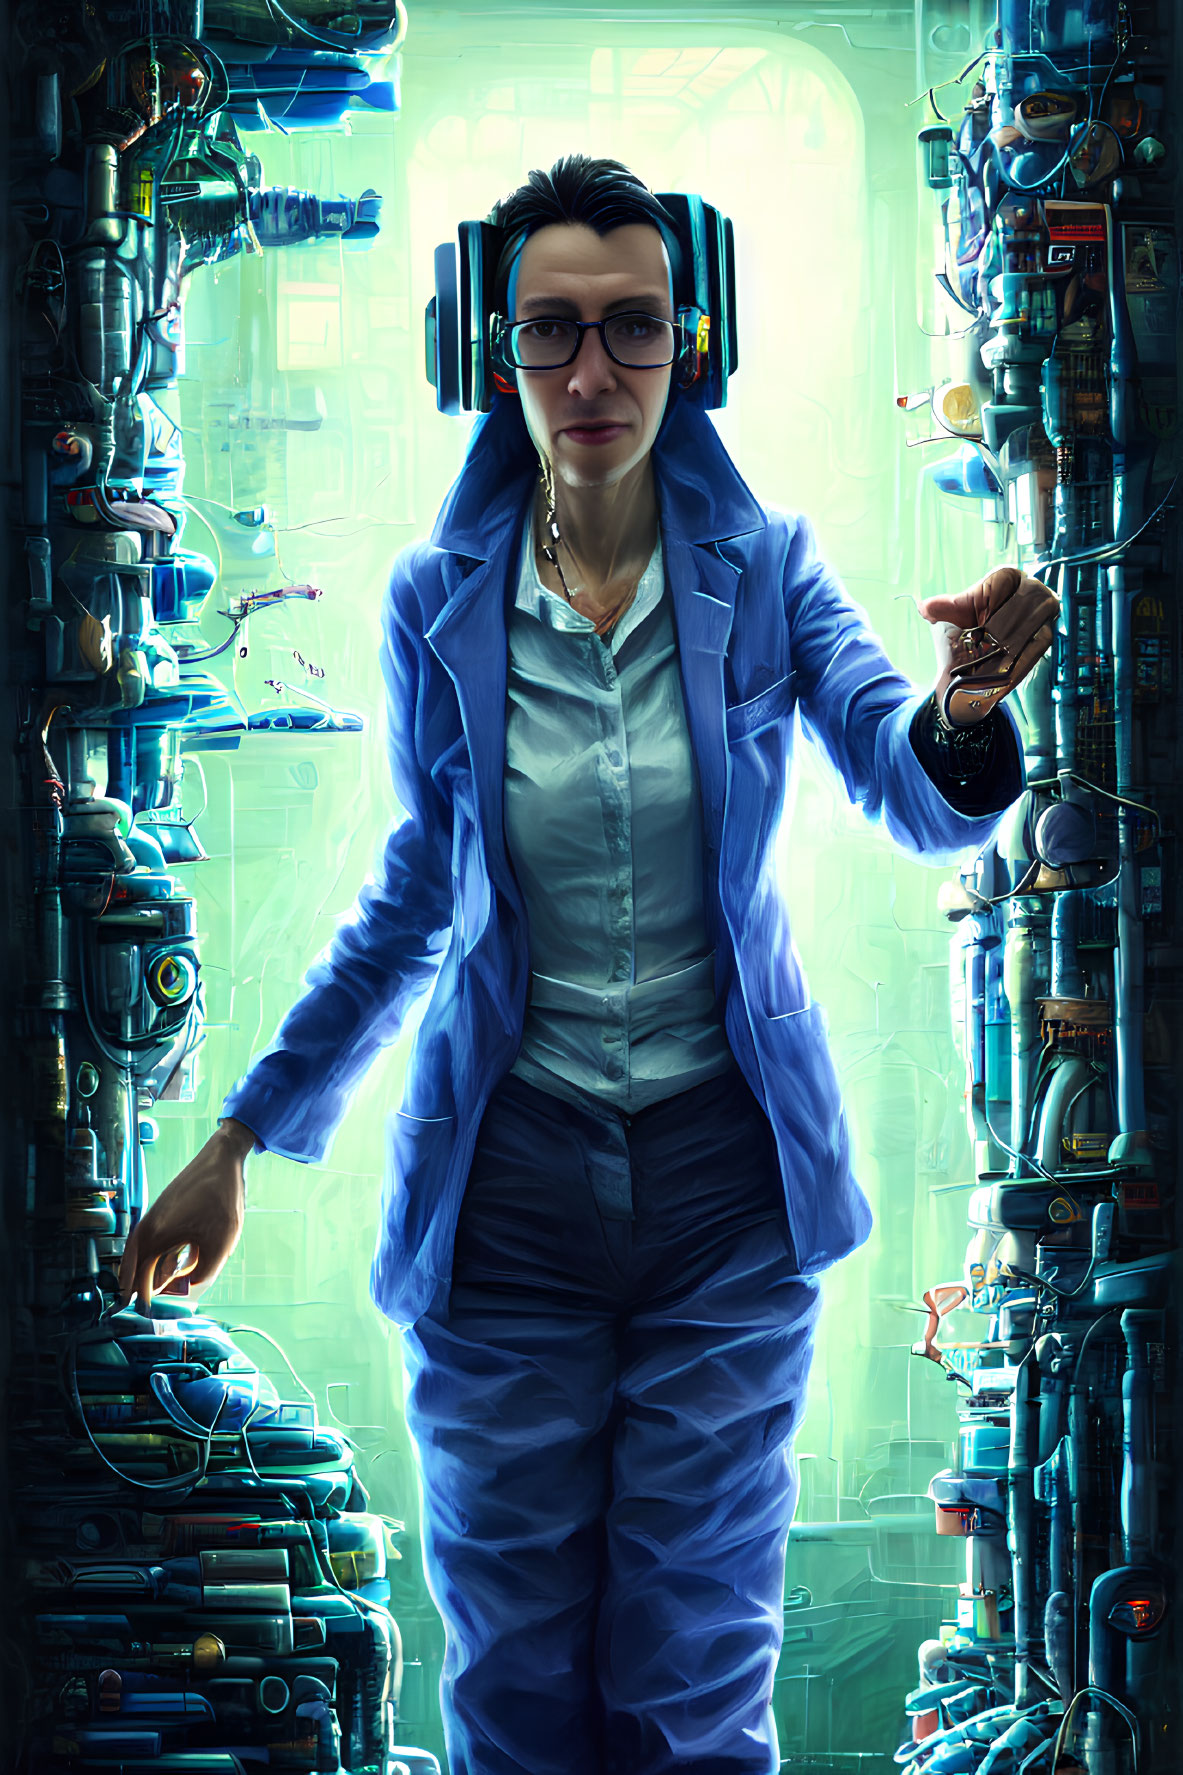 Confident person in blue suit with headphones in futuristic setting holding glowing sphere